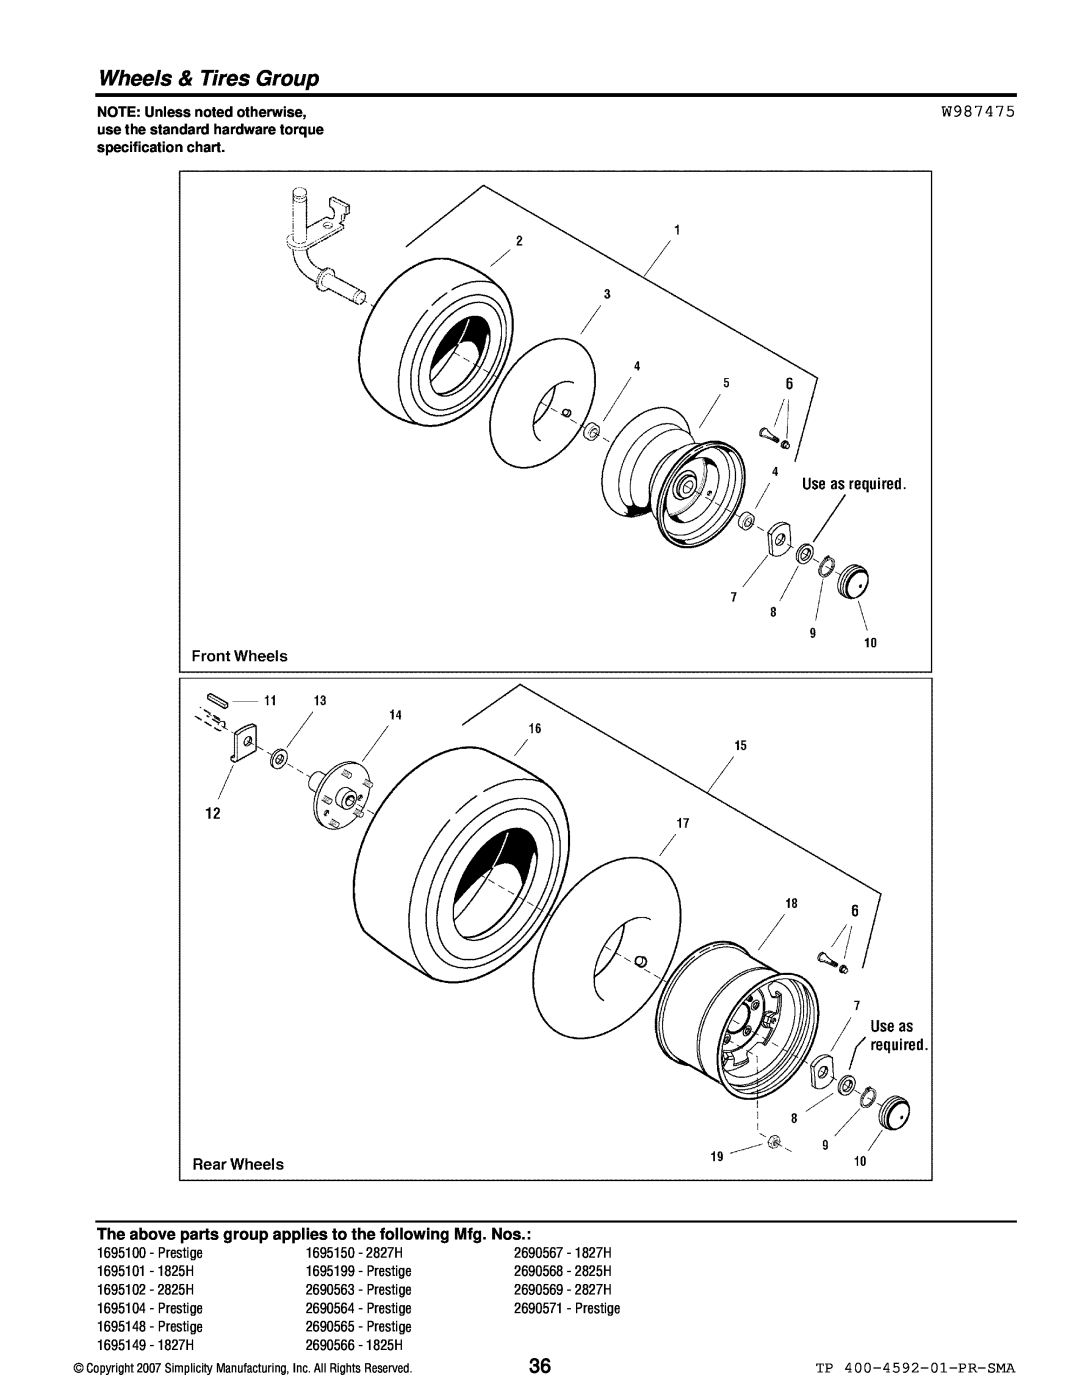 Simplicity 1800 Series manual Wheels & Tires Group, W987475, TP 400-4592-01-PR-SMA, NOTE: Unless noted otherwise 